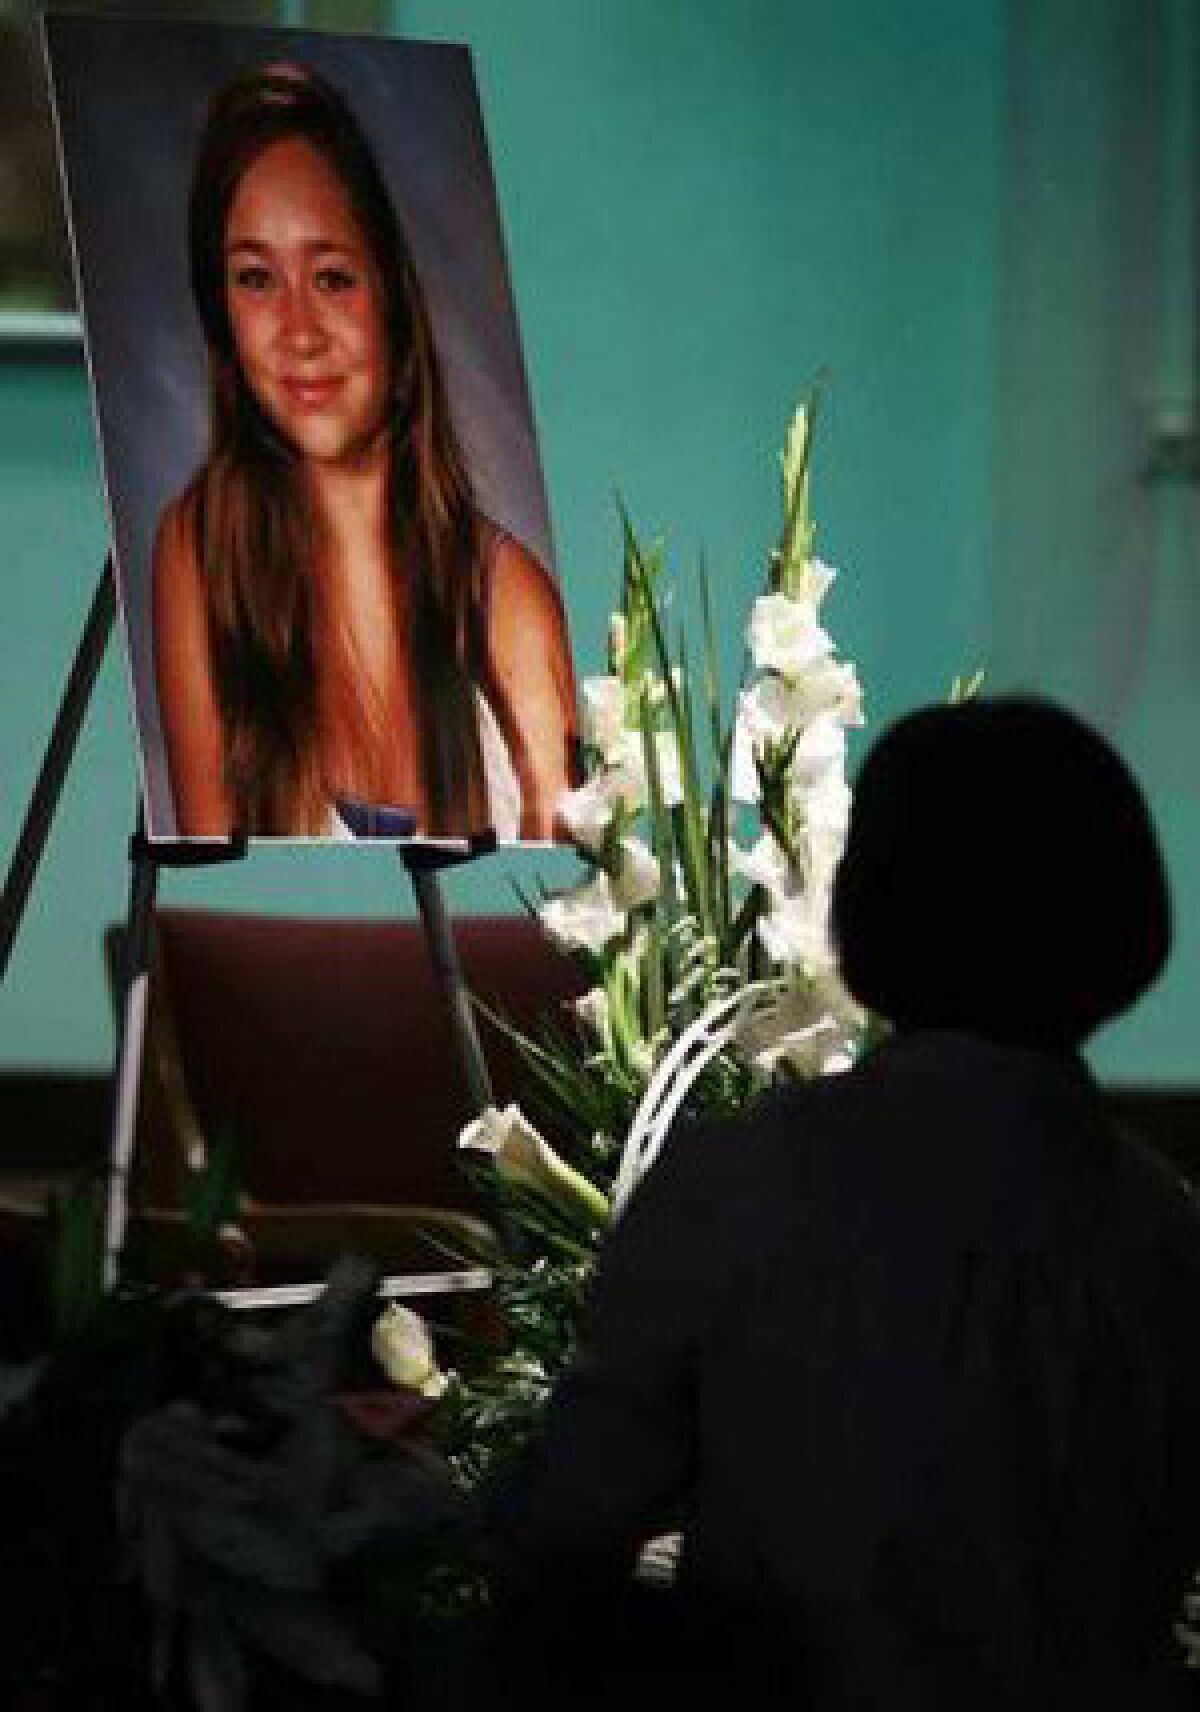 A mourner pauses in front of a picture of Ashton Sweet during a memorial service at the Chinese Baptist Church of Central Orange County in Irvine.